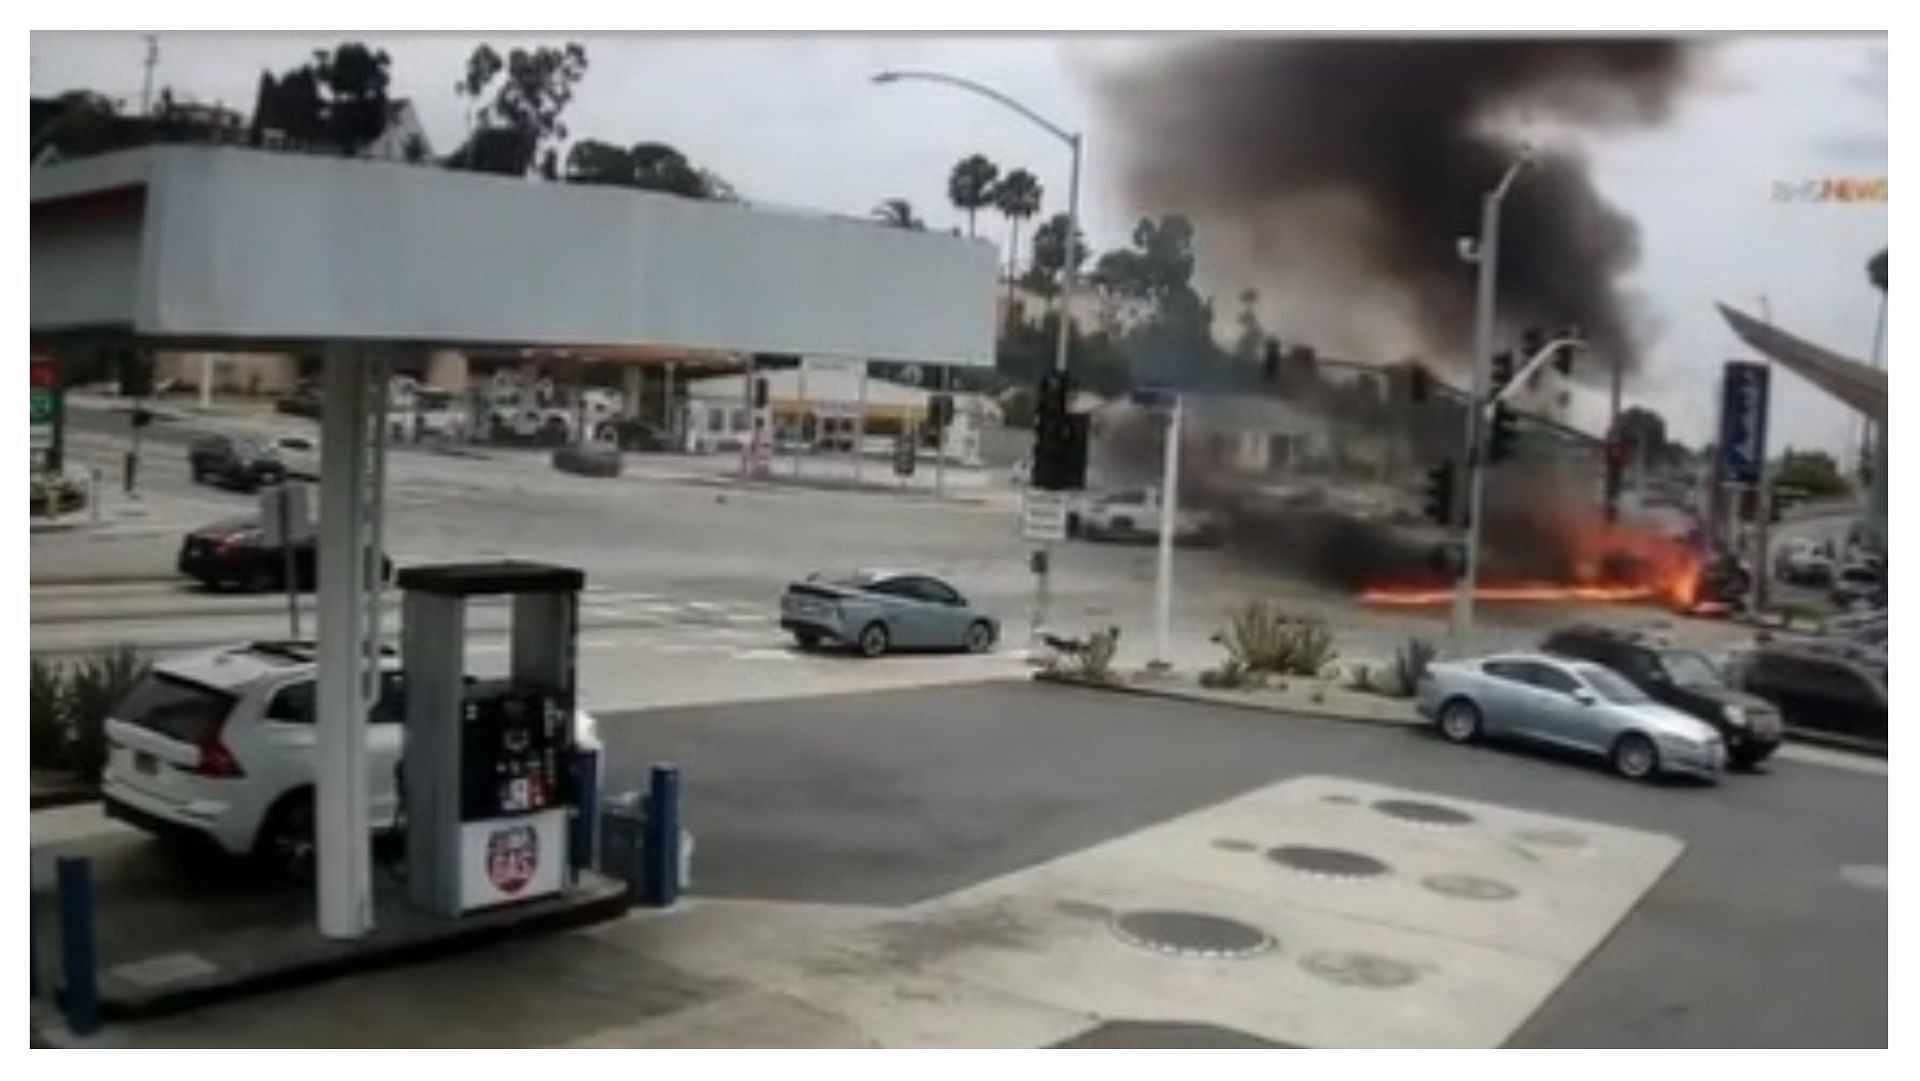 Fiery collision leaves five dead and eight injured in Los Angeles (Image via Twitter/TheSuper)